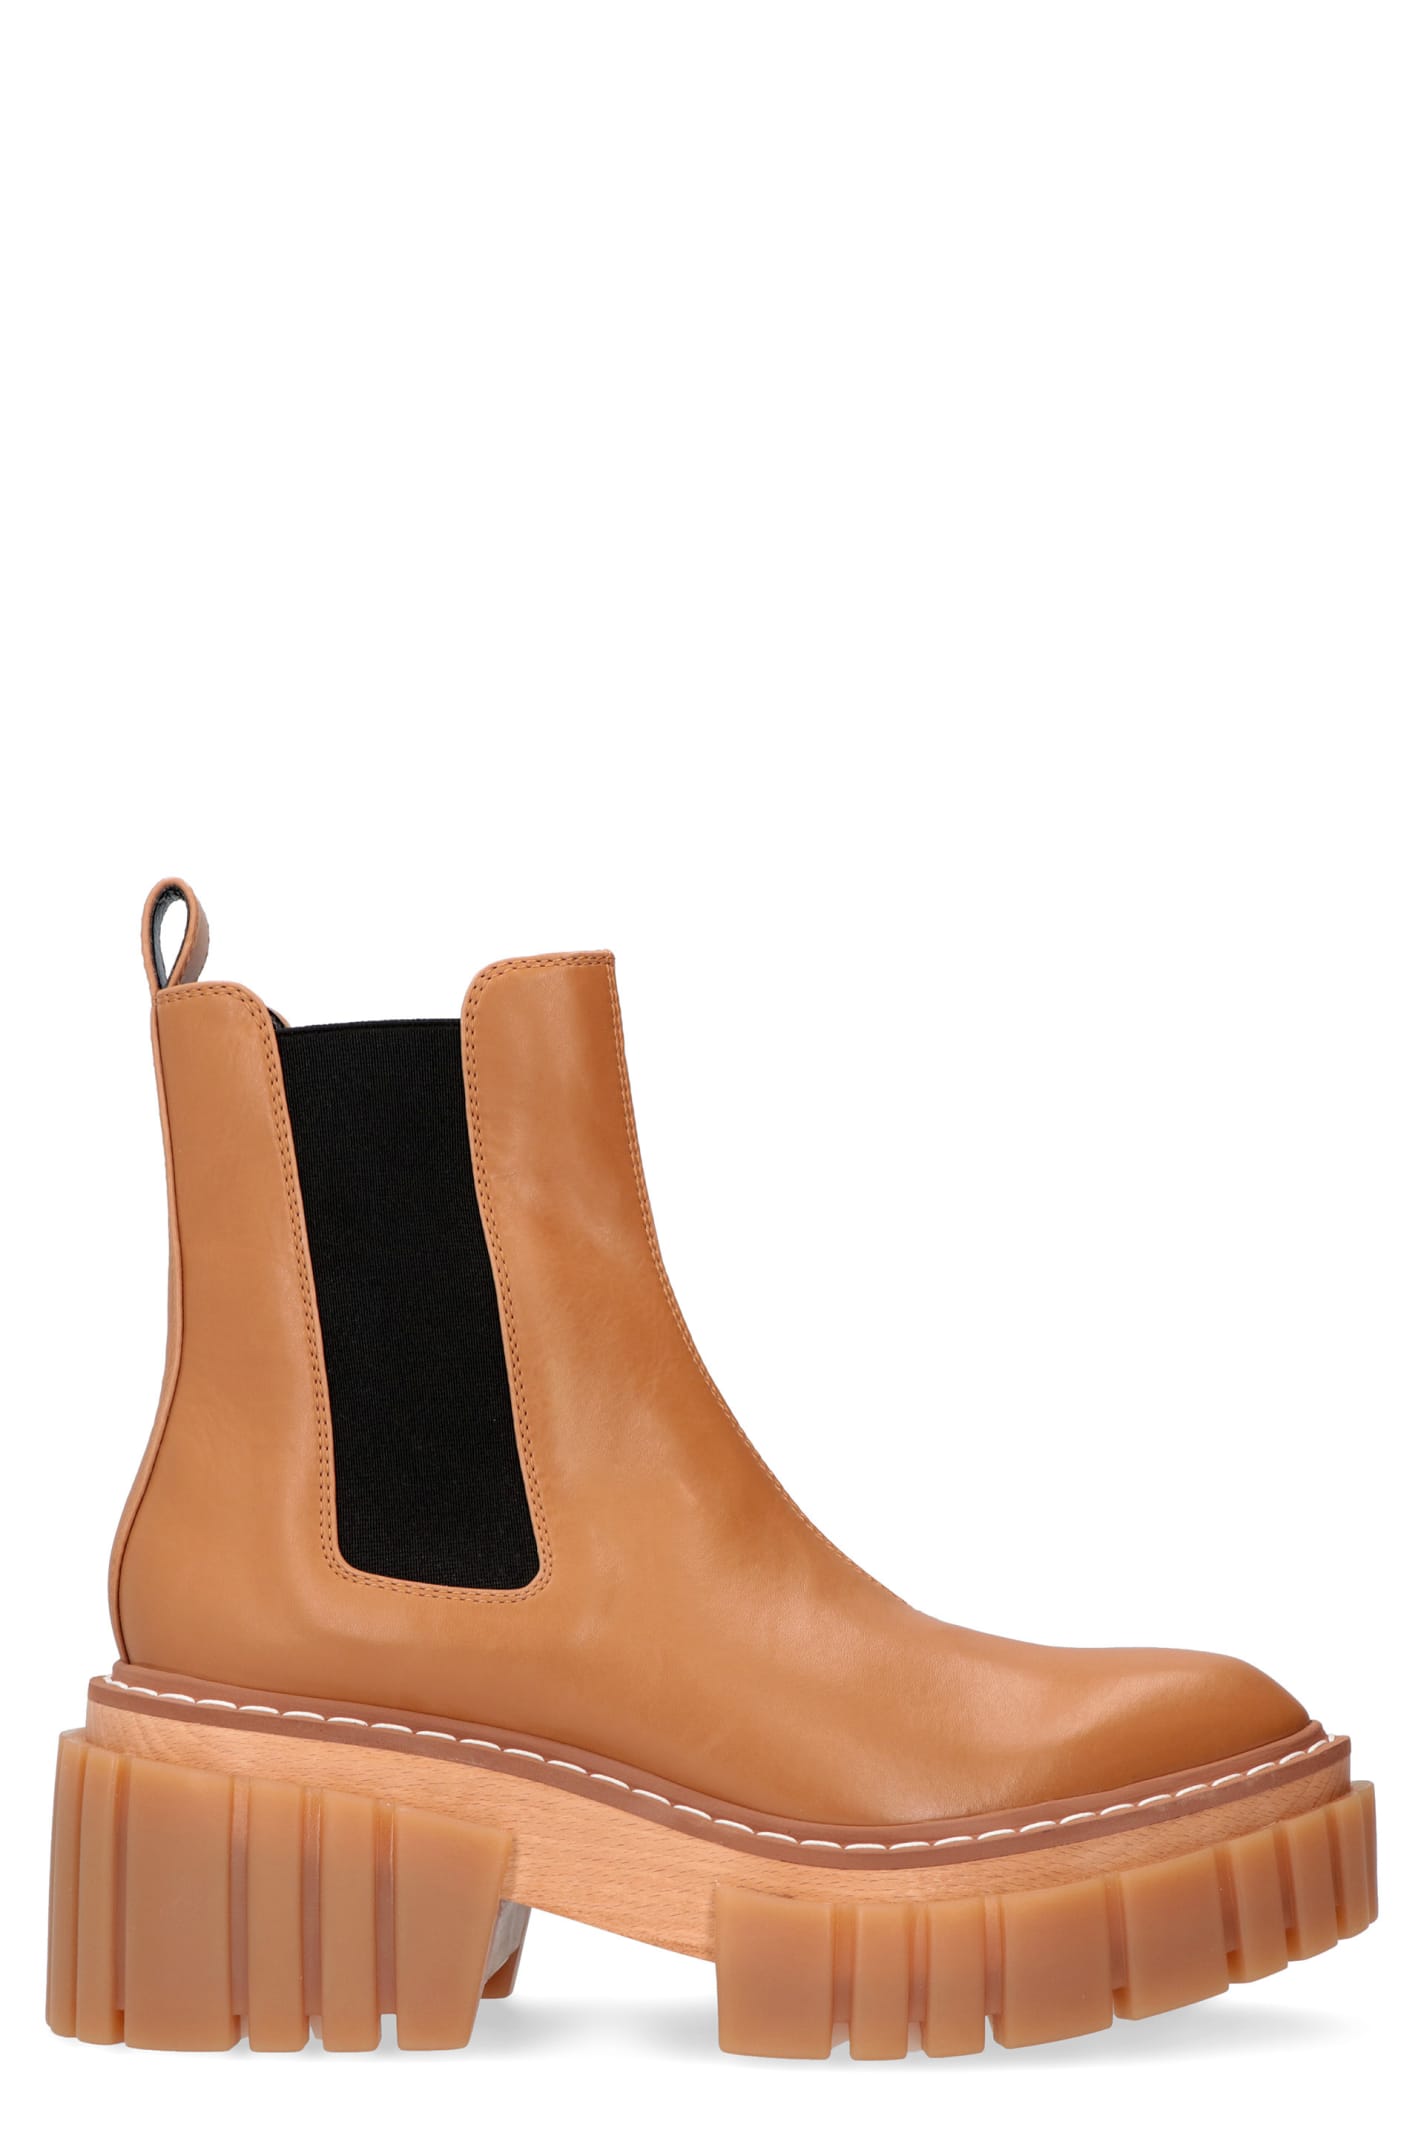 Stella McCartney Emilie Wedge Ankle Boots